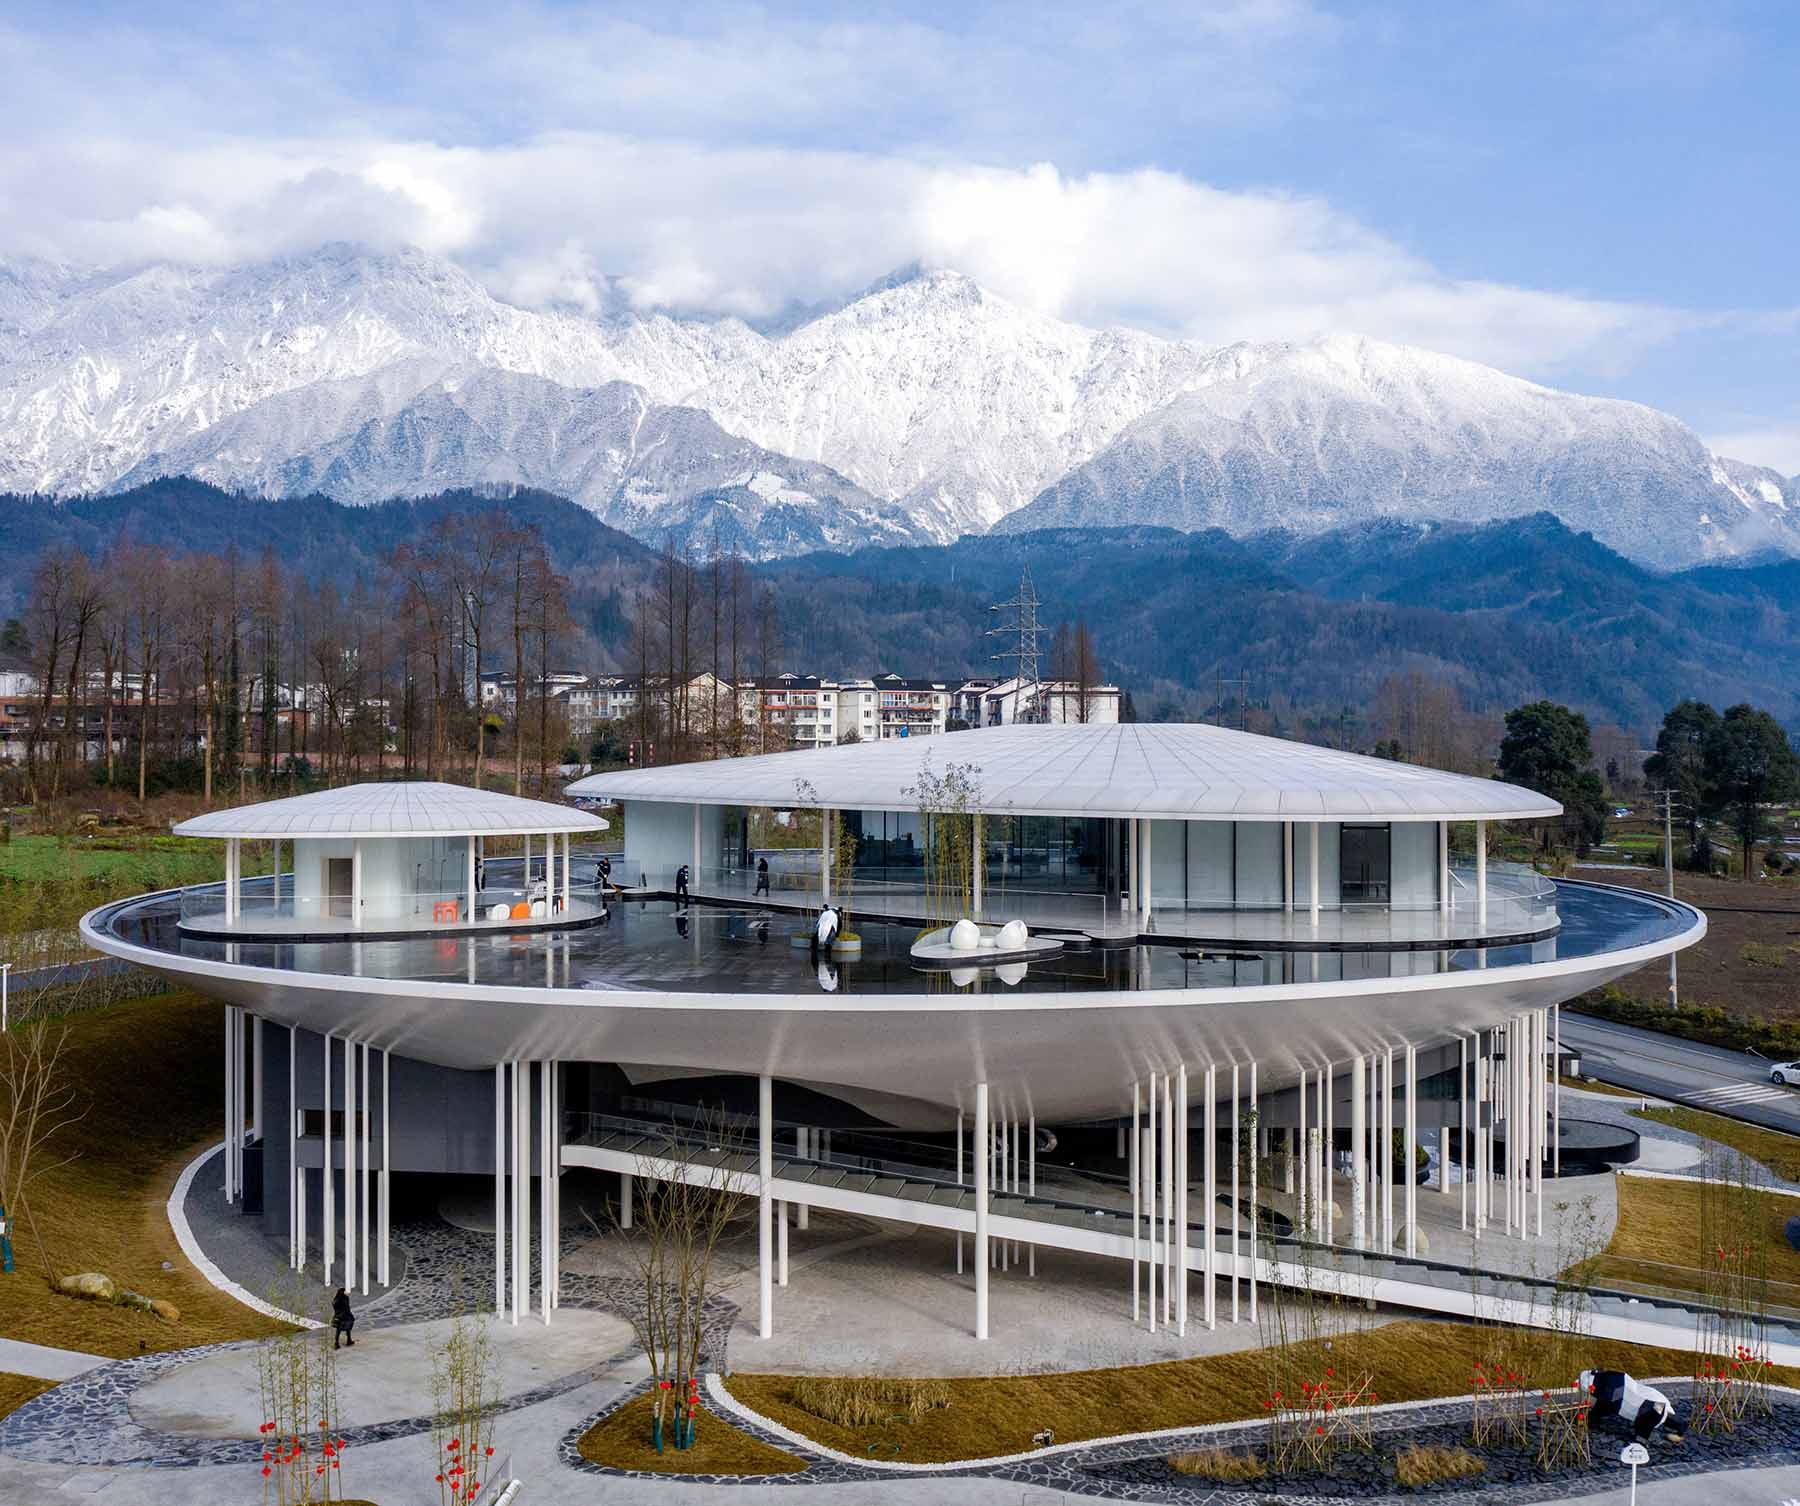 This public building in China features a white 'bamboo forest' at the bottom, which is the foundation of the 'clouds', while the "bamboo forest" on the ground floor is used as a rural living room.